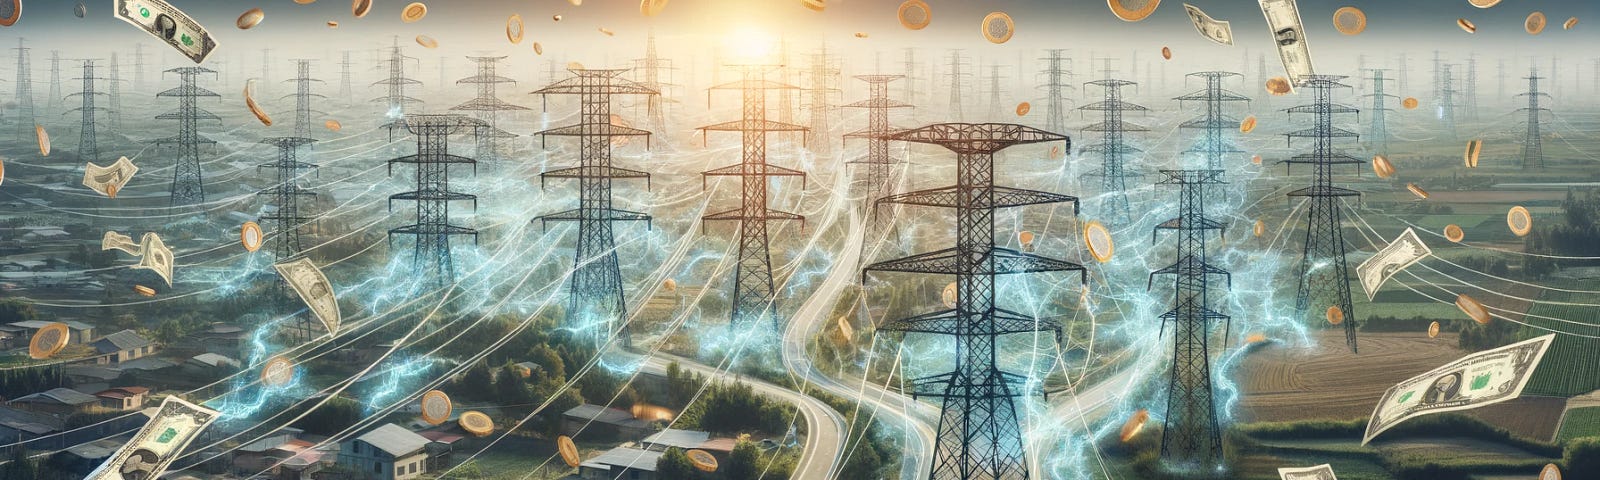 ChatGPT & DALL-E generated panoramic image depicting money flowing along transmission lines, symbolizing the flow of capital and investment through various sectors of the economy.